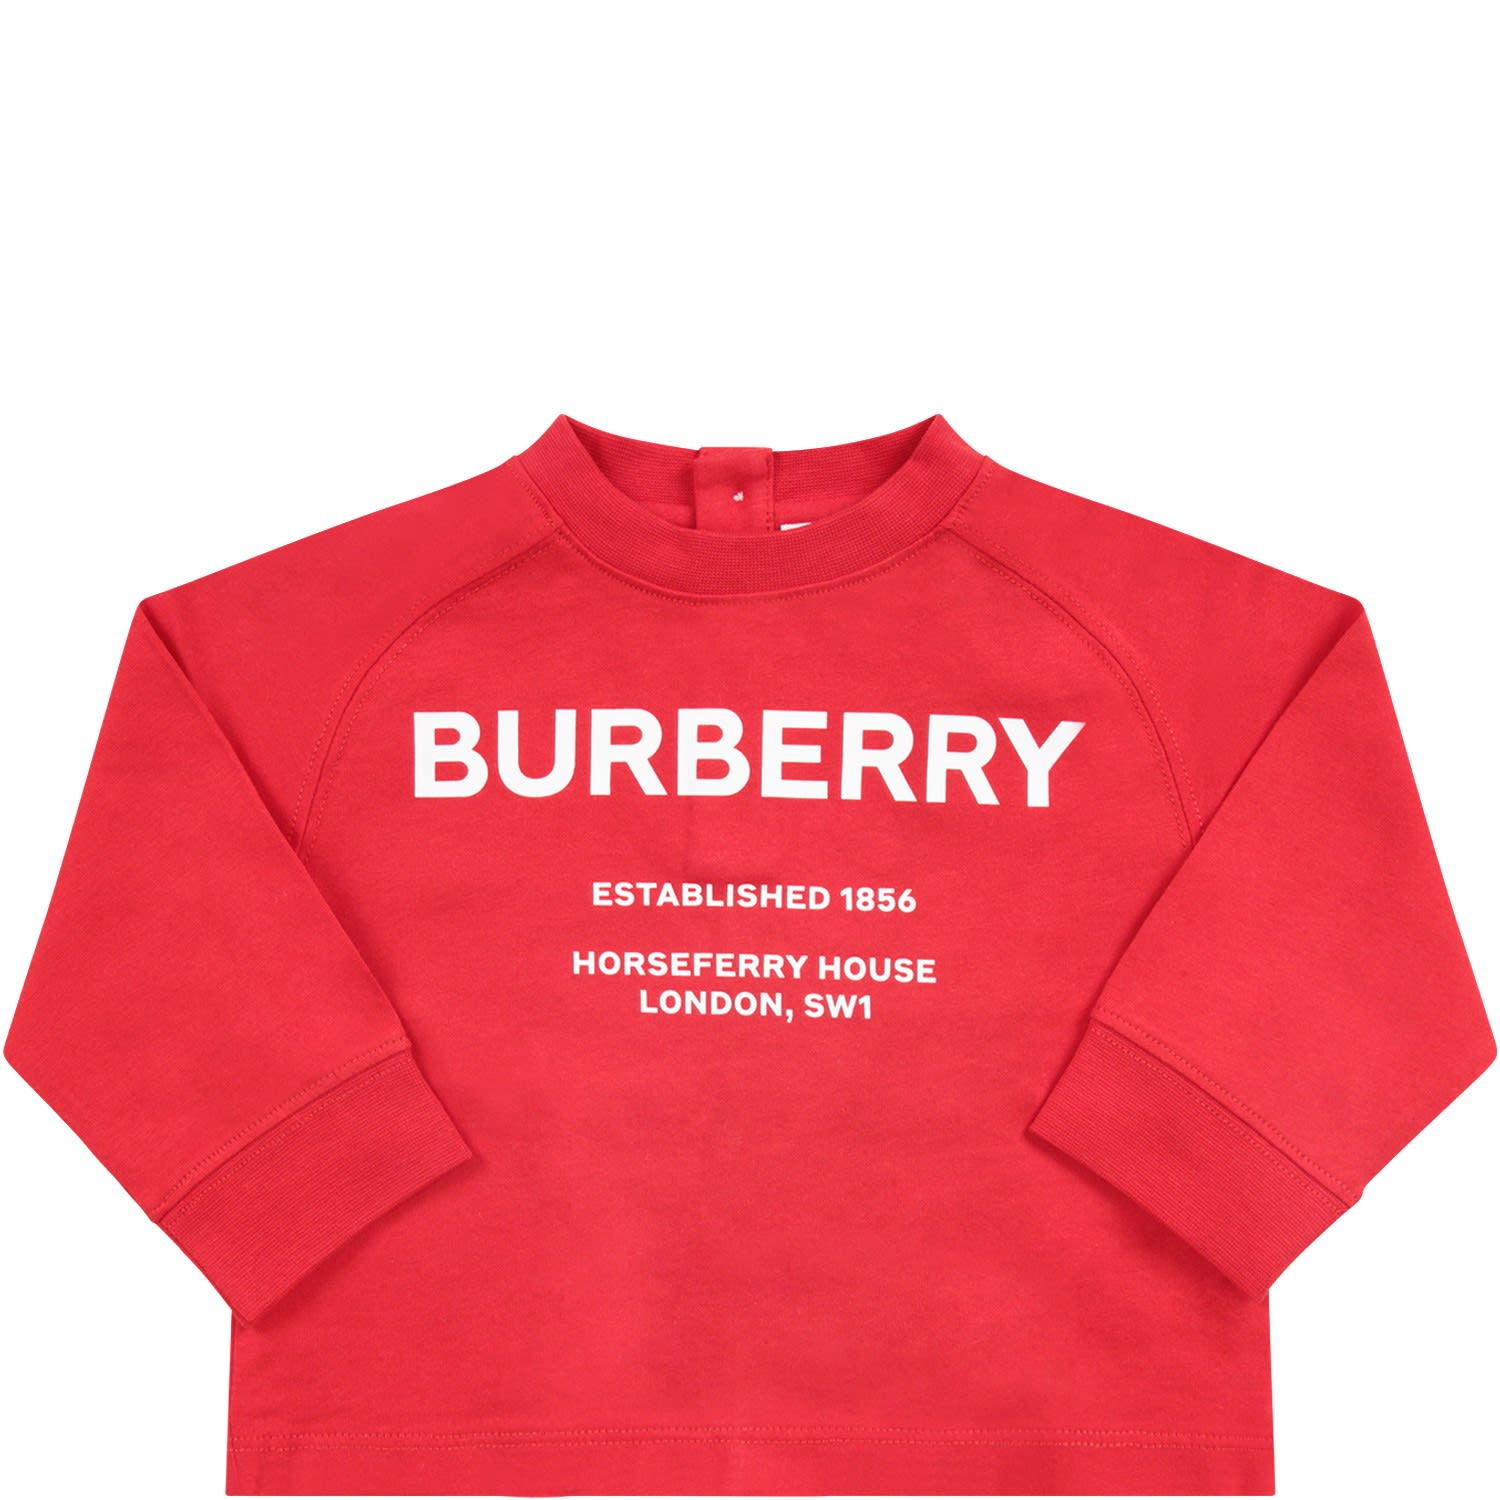 burberry shirt black and red